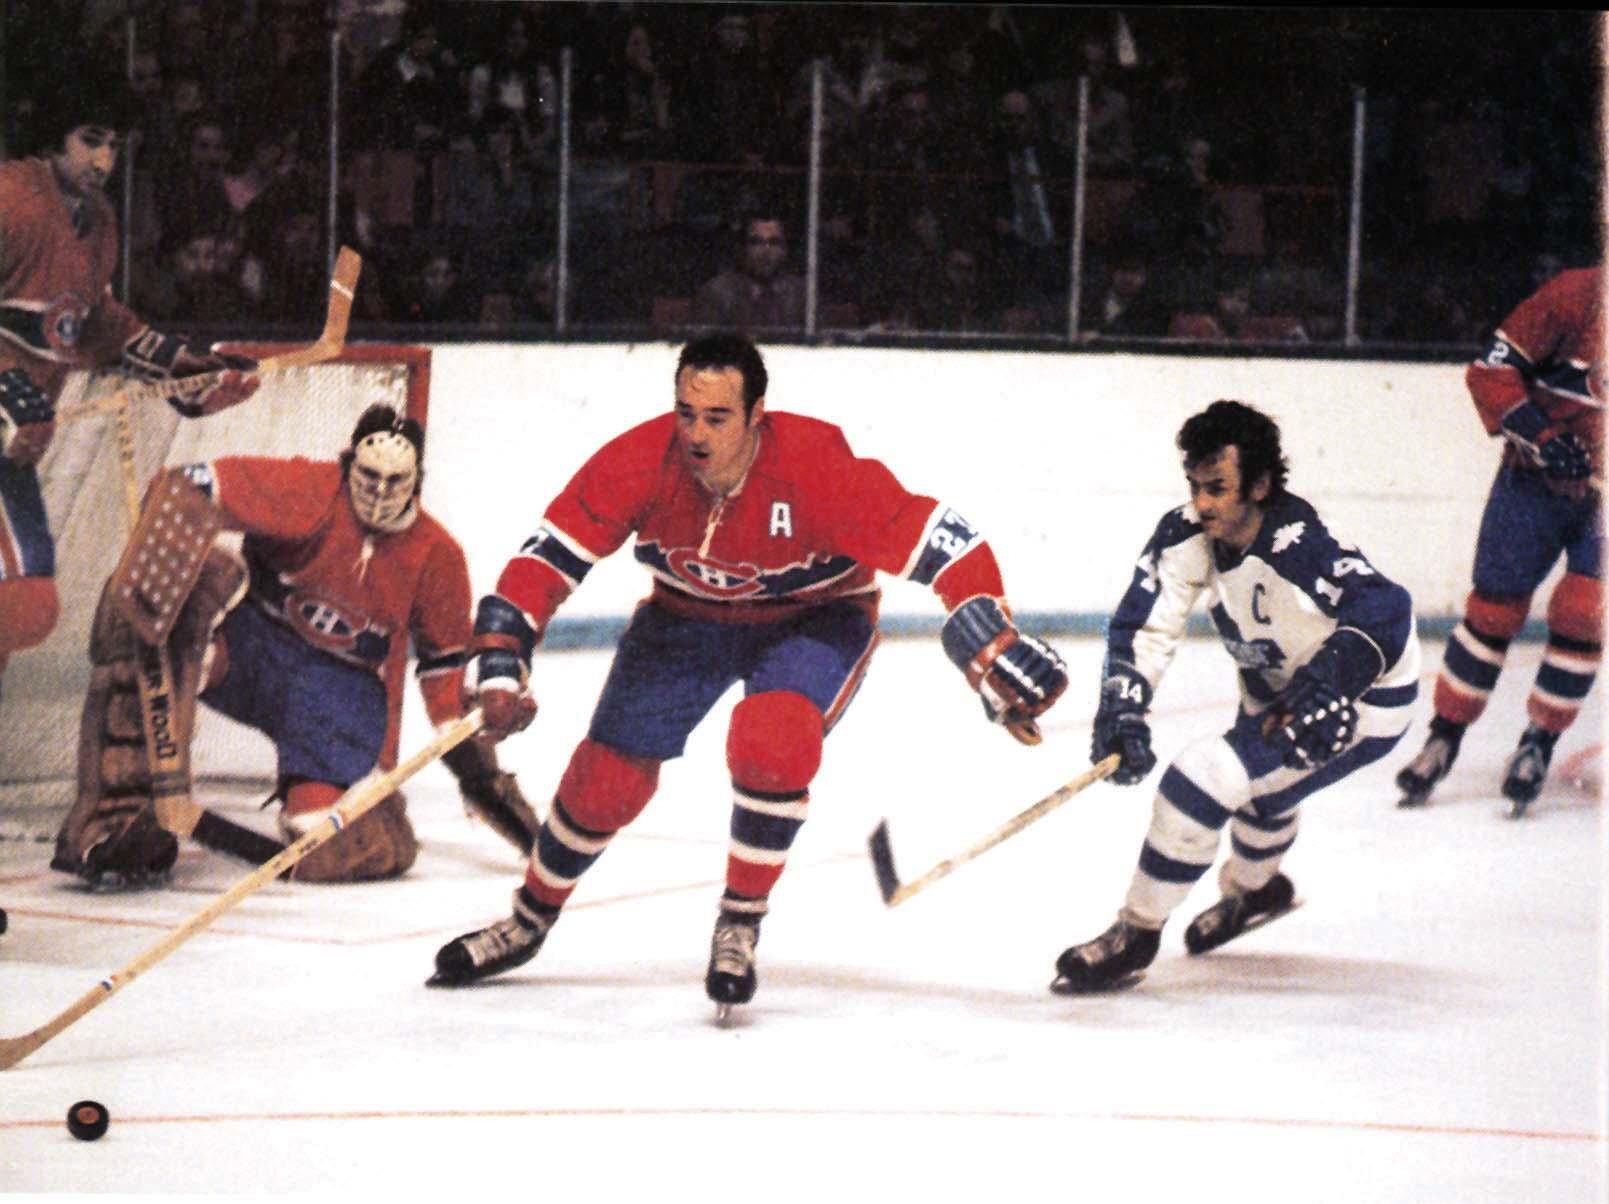 Remembering Former Red Wing Peter Mahovlich - Vintage Detroit Collection